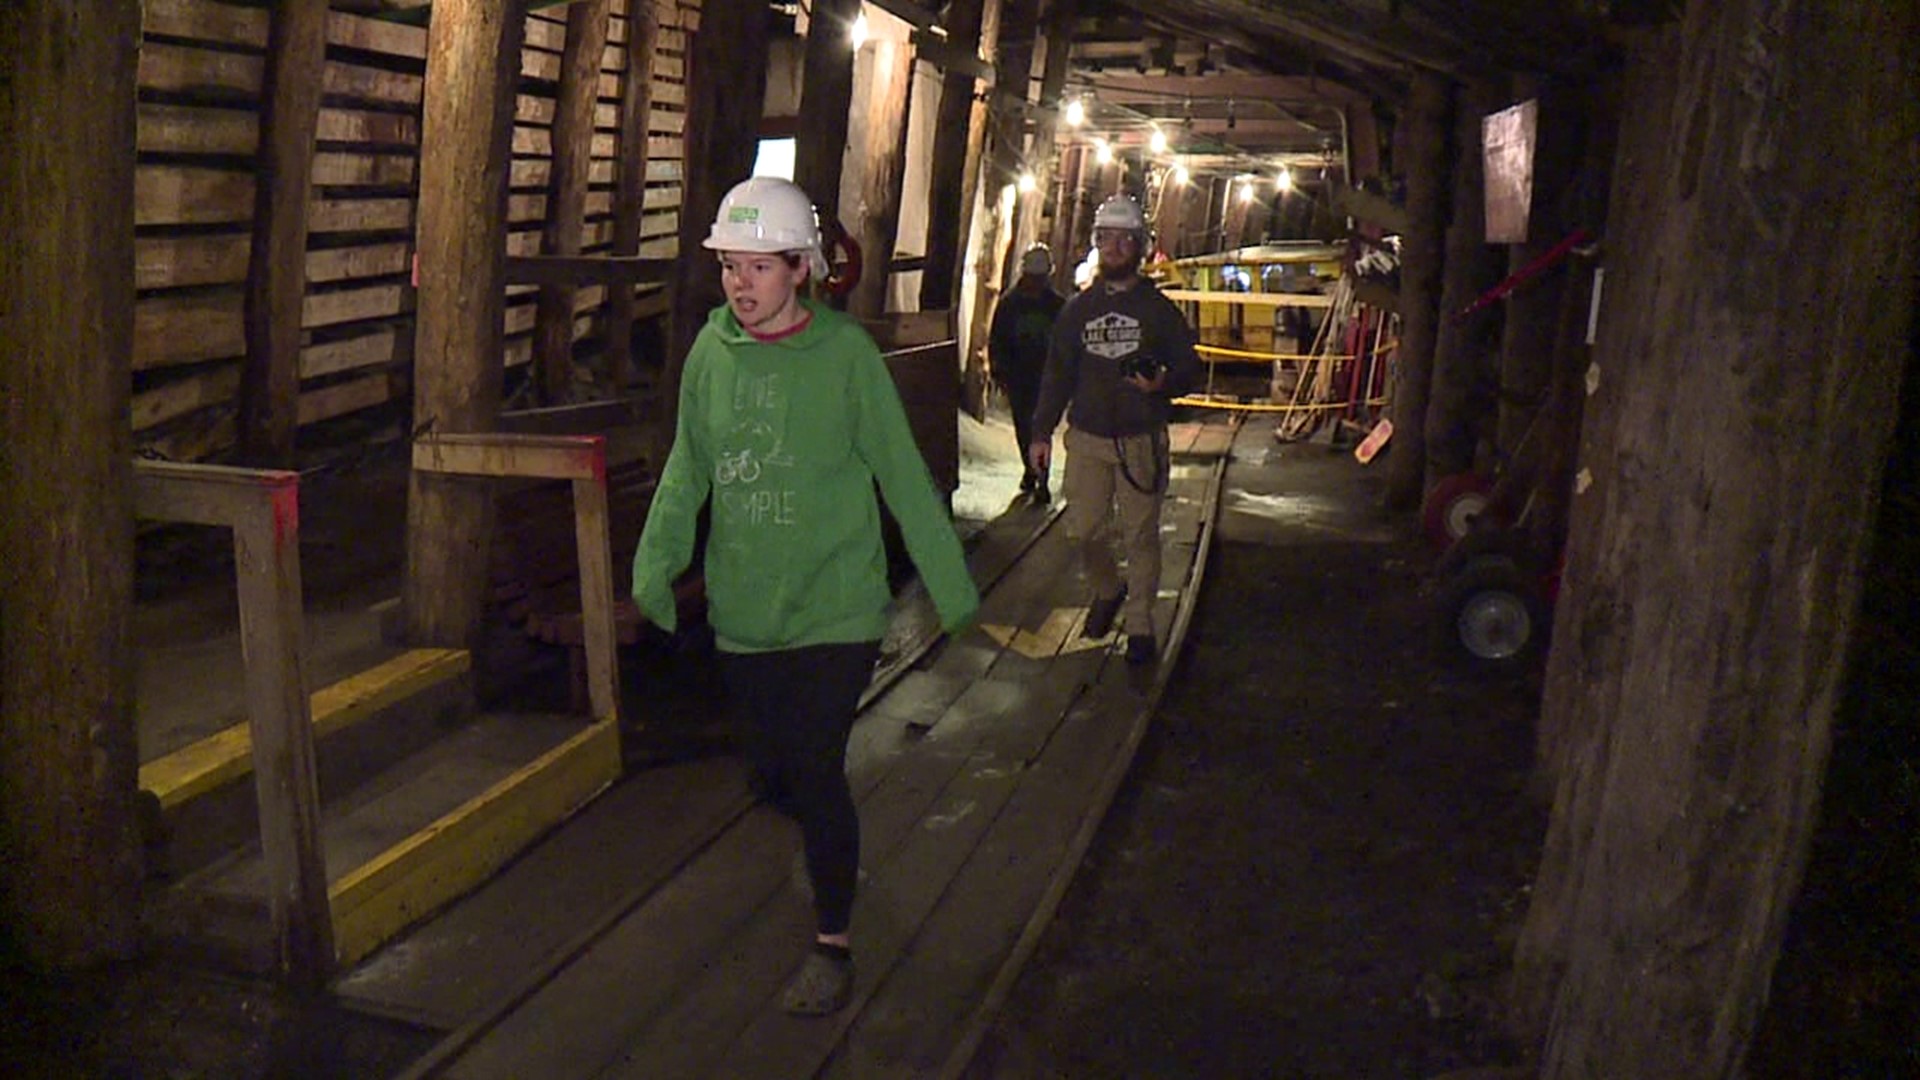 Another place to spend your father's day weekend is going underground for the Lackawanna Coal Mine Tour that is officially open for the season.